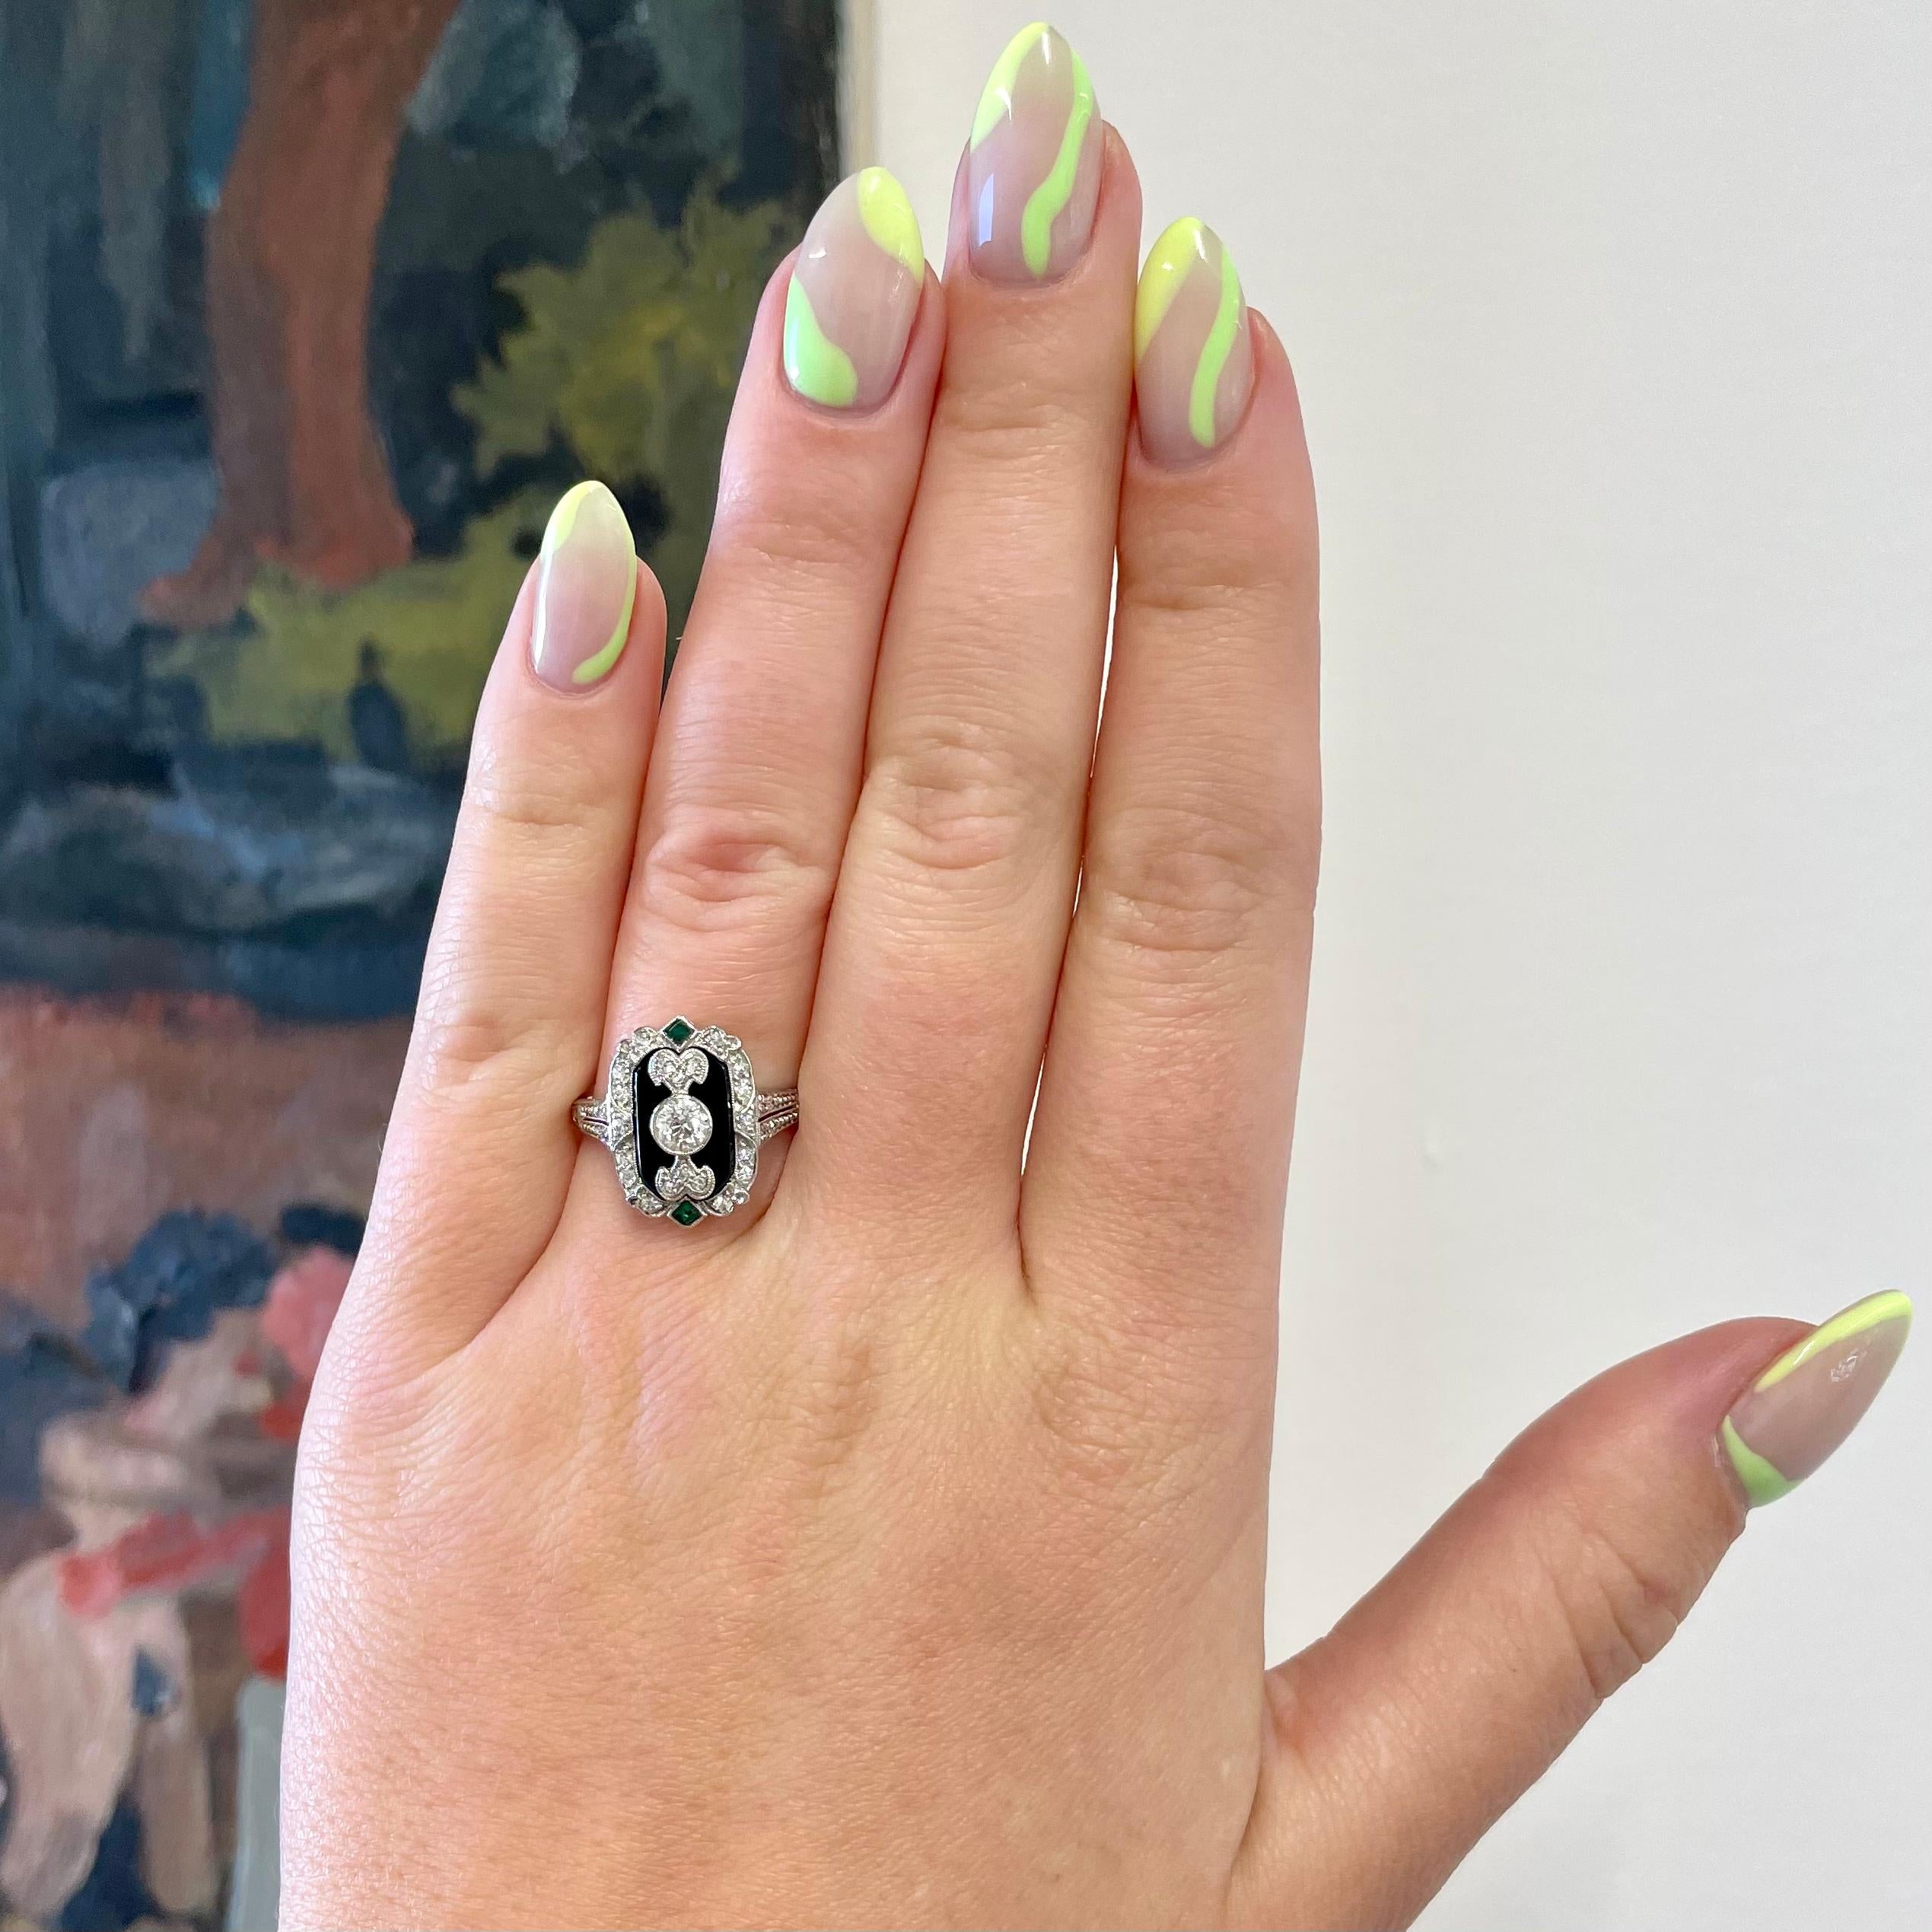 Talk about a dramatic Art Deco moment! This is a ring like no other. A ring that will attract admirers and highlight your daring personality. This is a vintage tribute to the iconic Art Deco era that will inspire you to create and be fabulous for